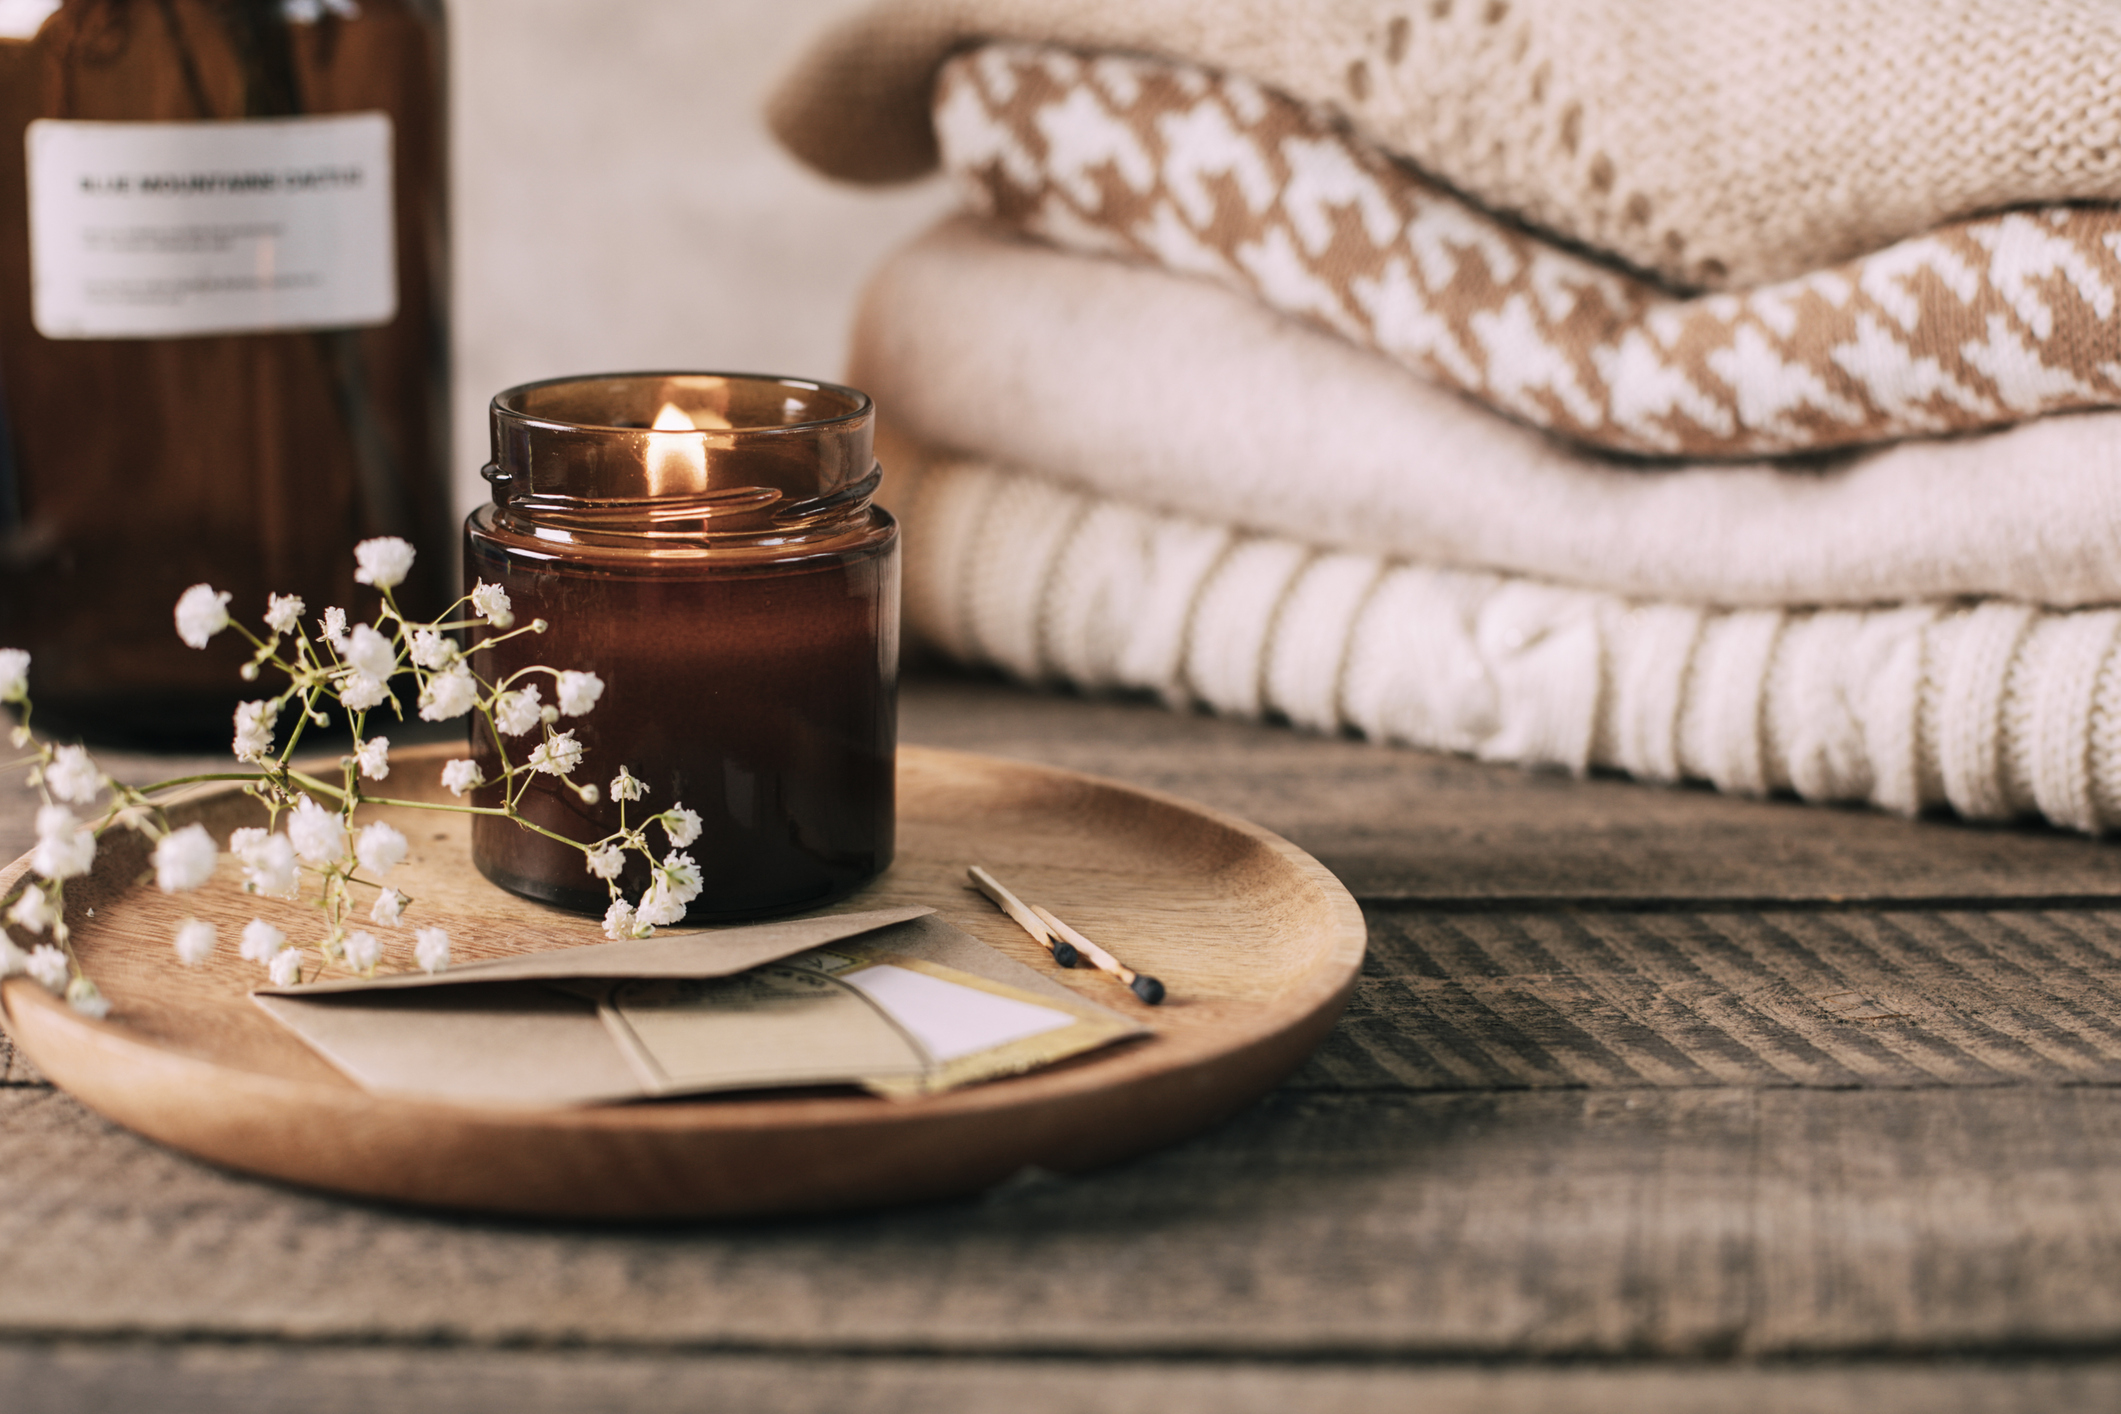 Five Ways to Make Your Home Smell Amazing